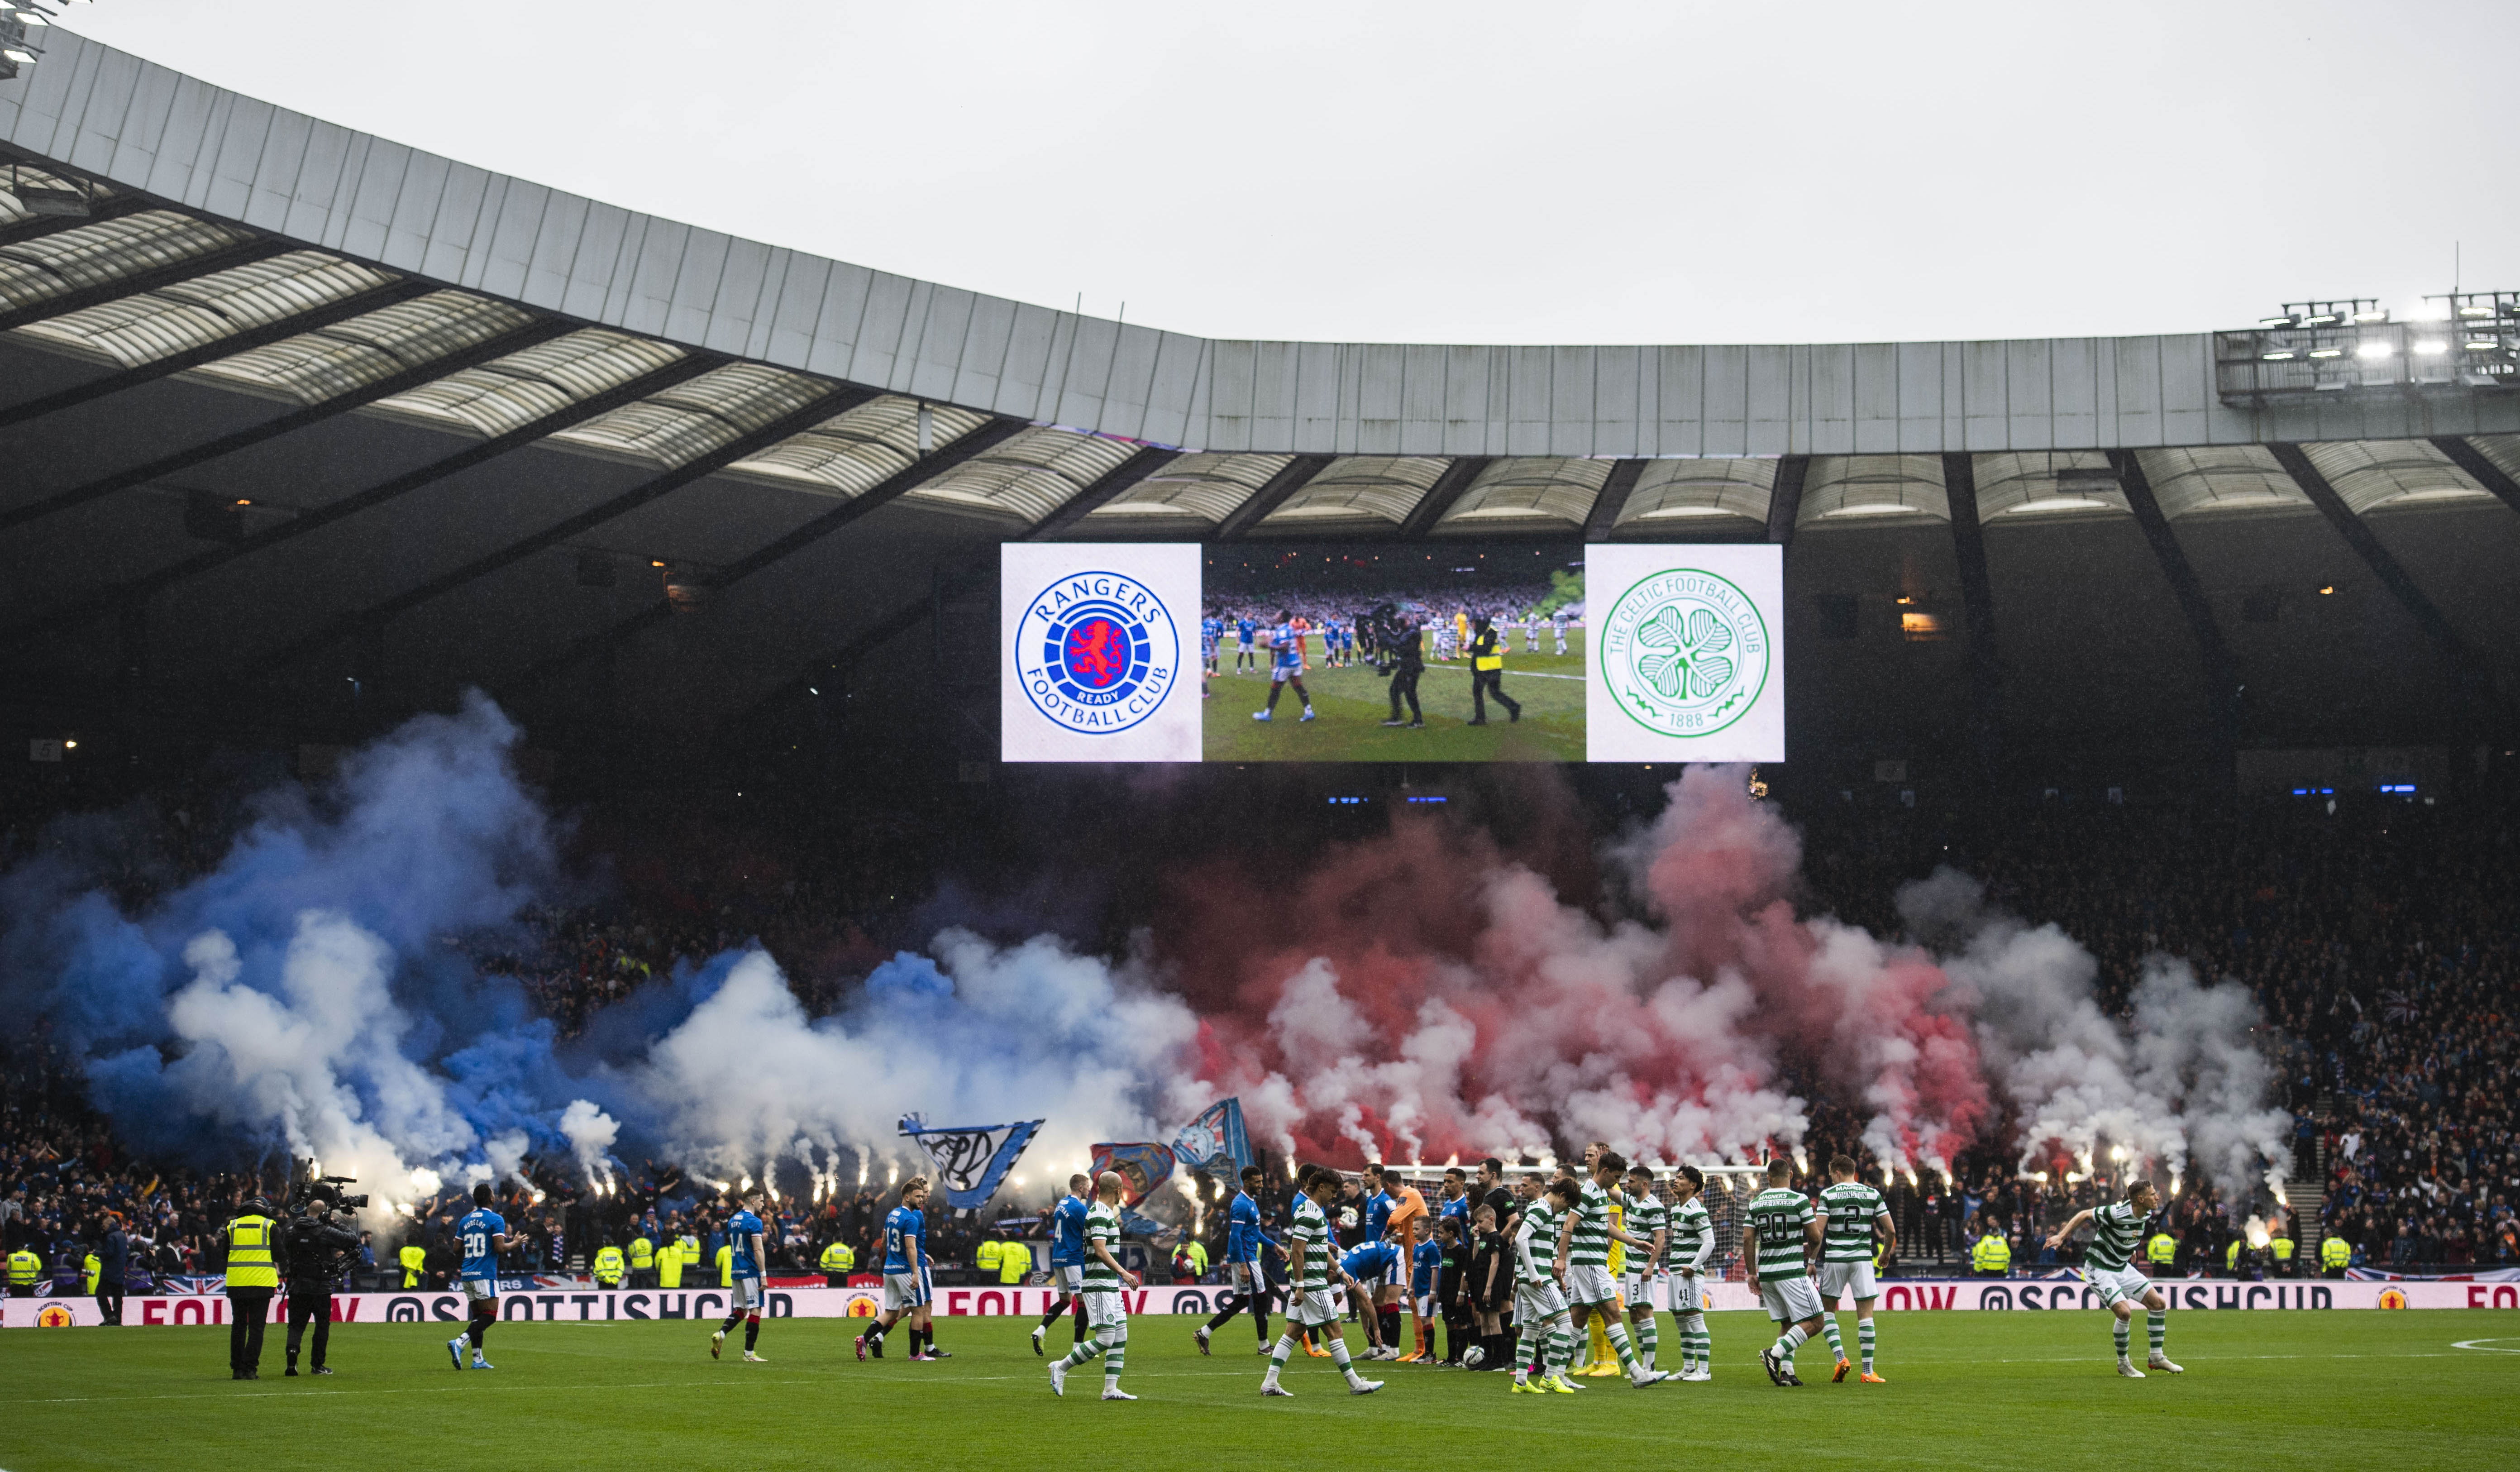 The teams emerge onto the pitch during a Scottish Cup semi-final match between Rangers and Celtic at Hampden Park, on April 30, 2023.